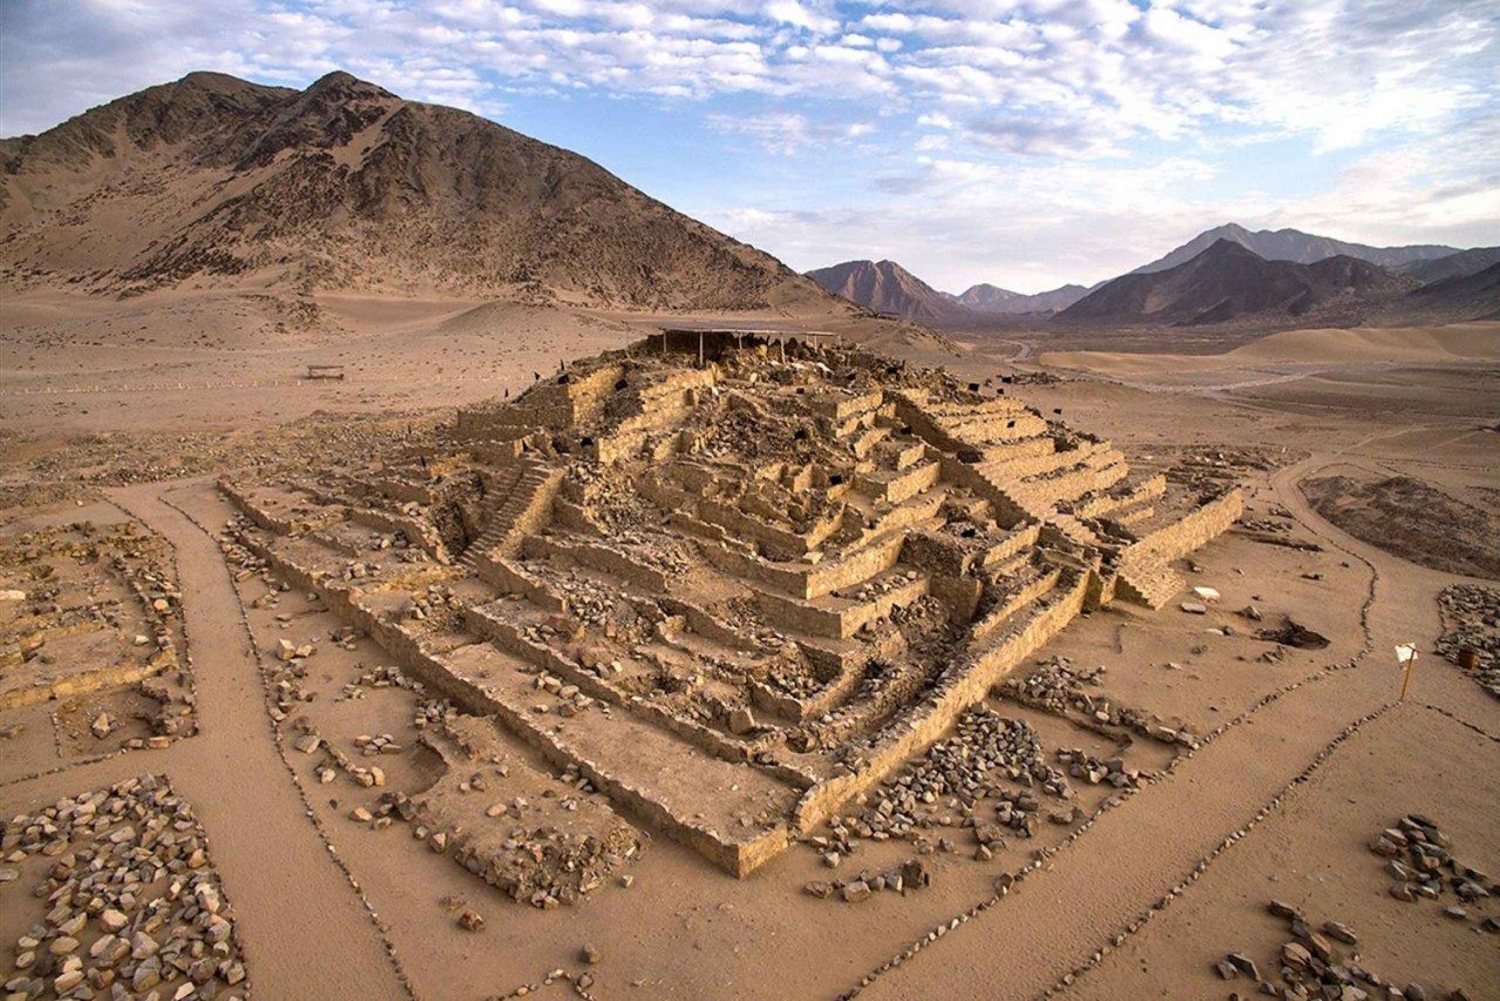 From Lima: Excursion to Caral and Bandurria